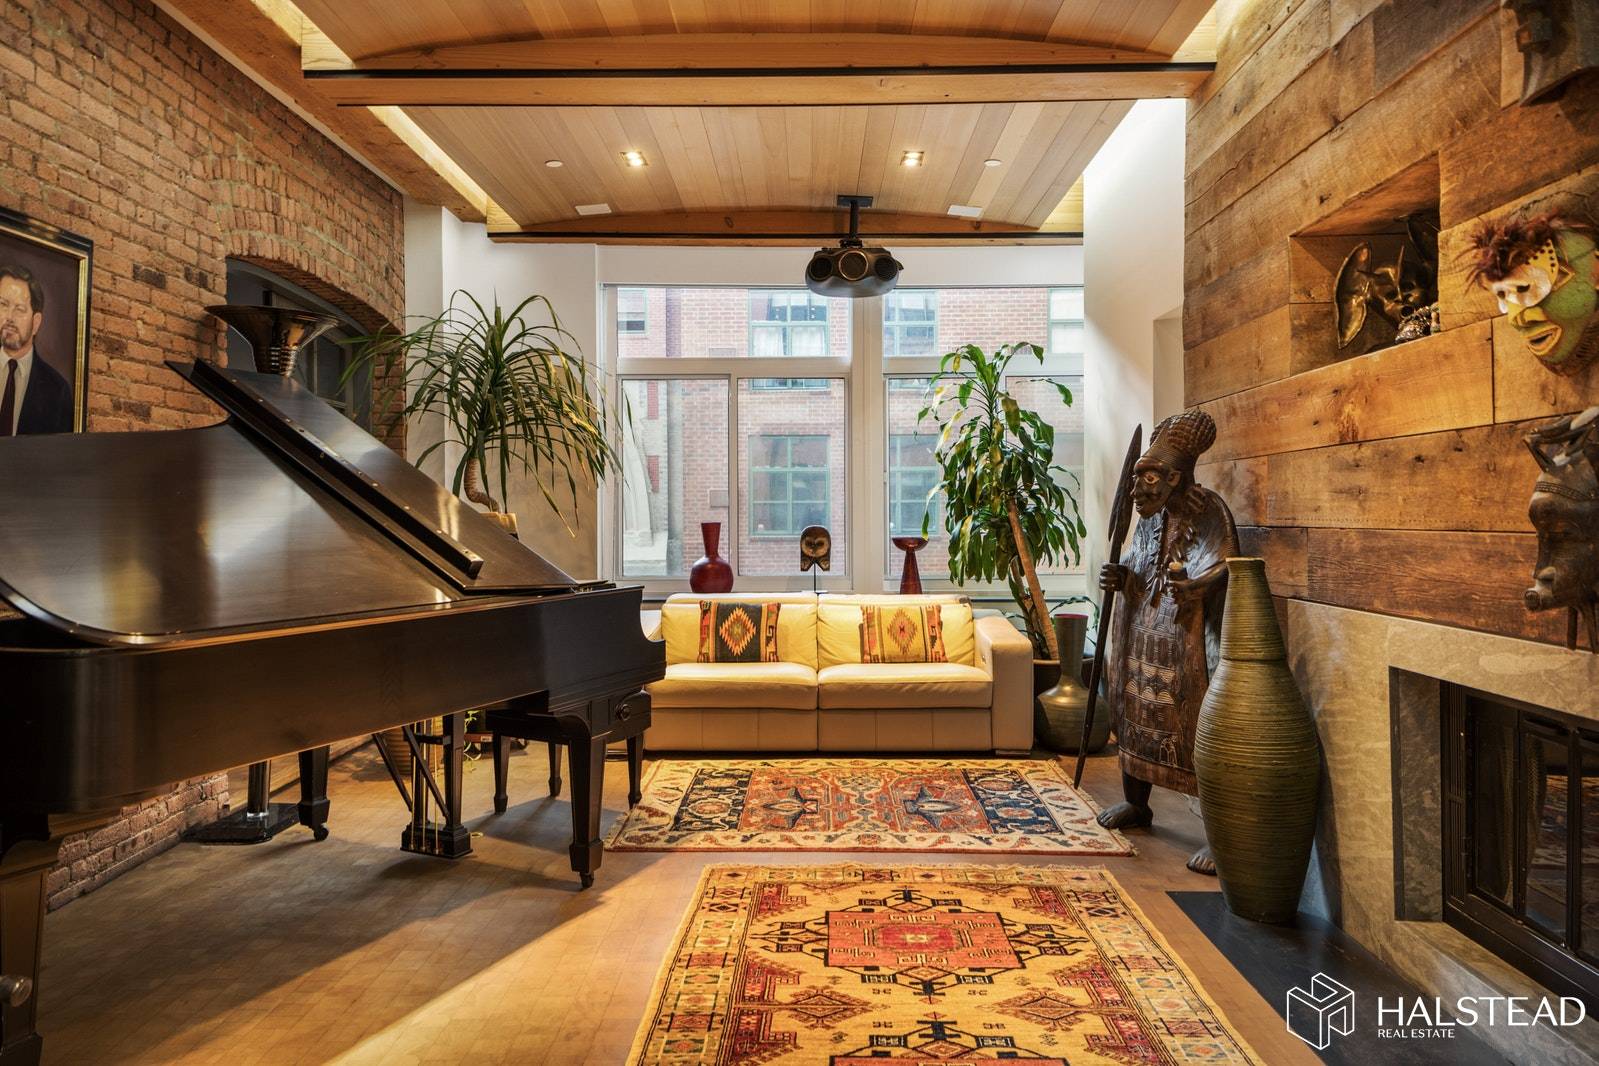 No detail has been overlooked in this well thought out architecturally re designed loft condominium.